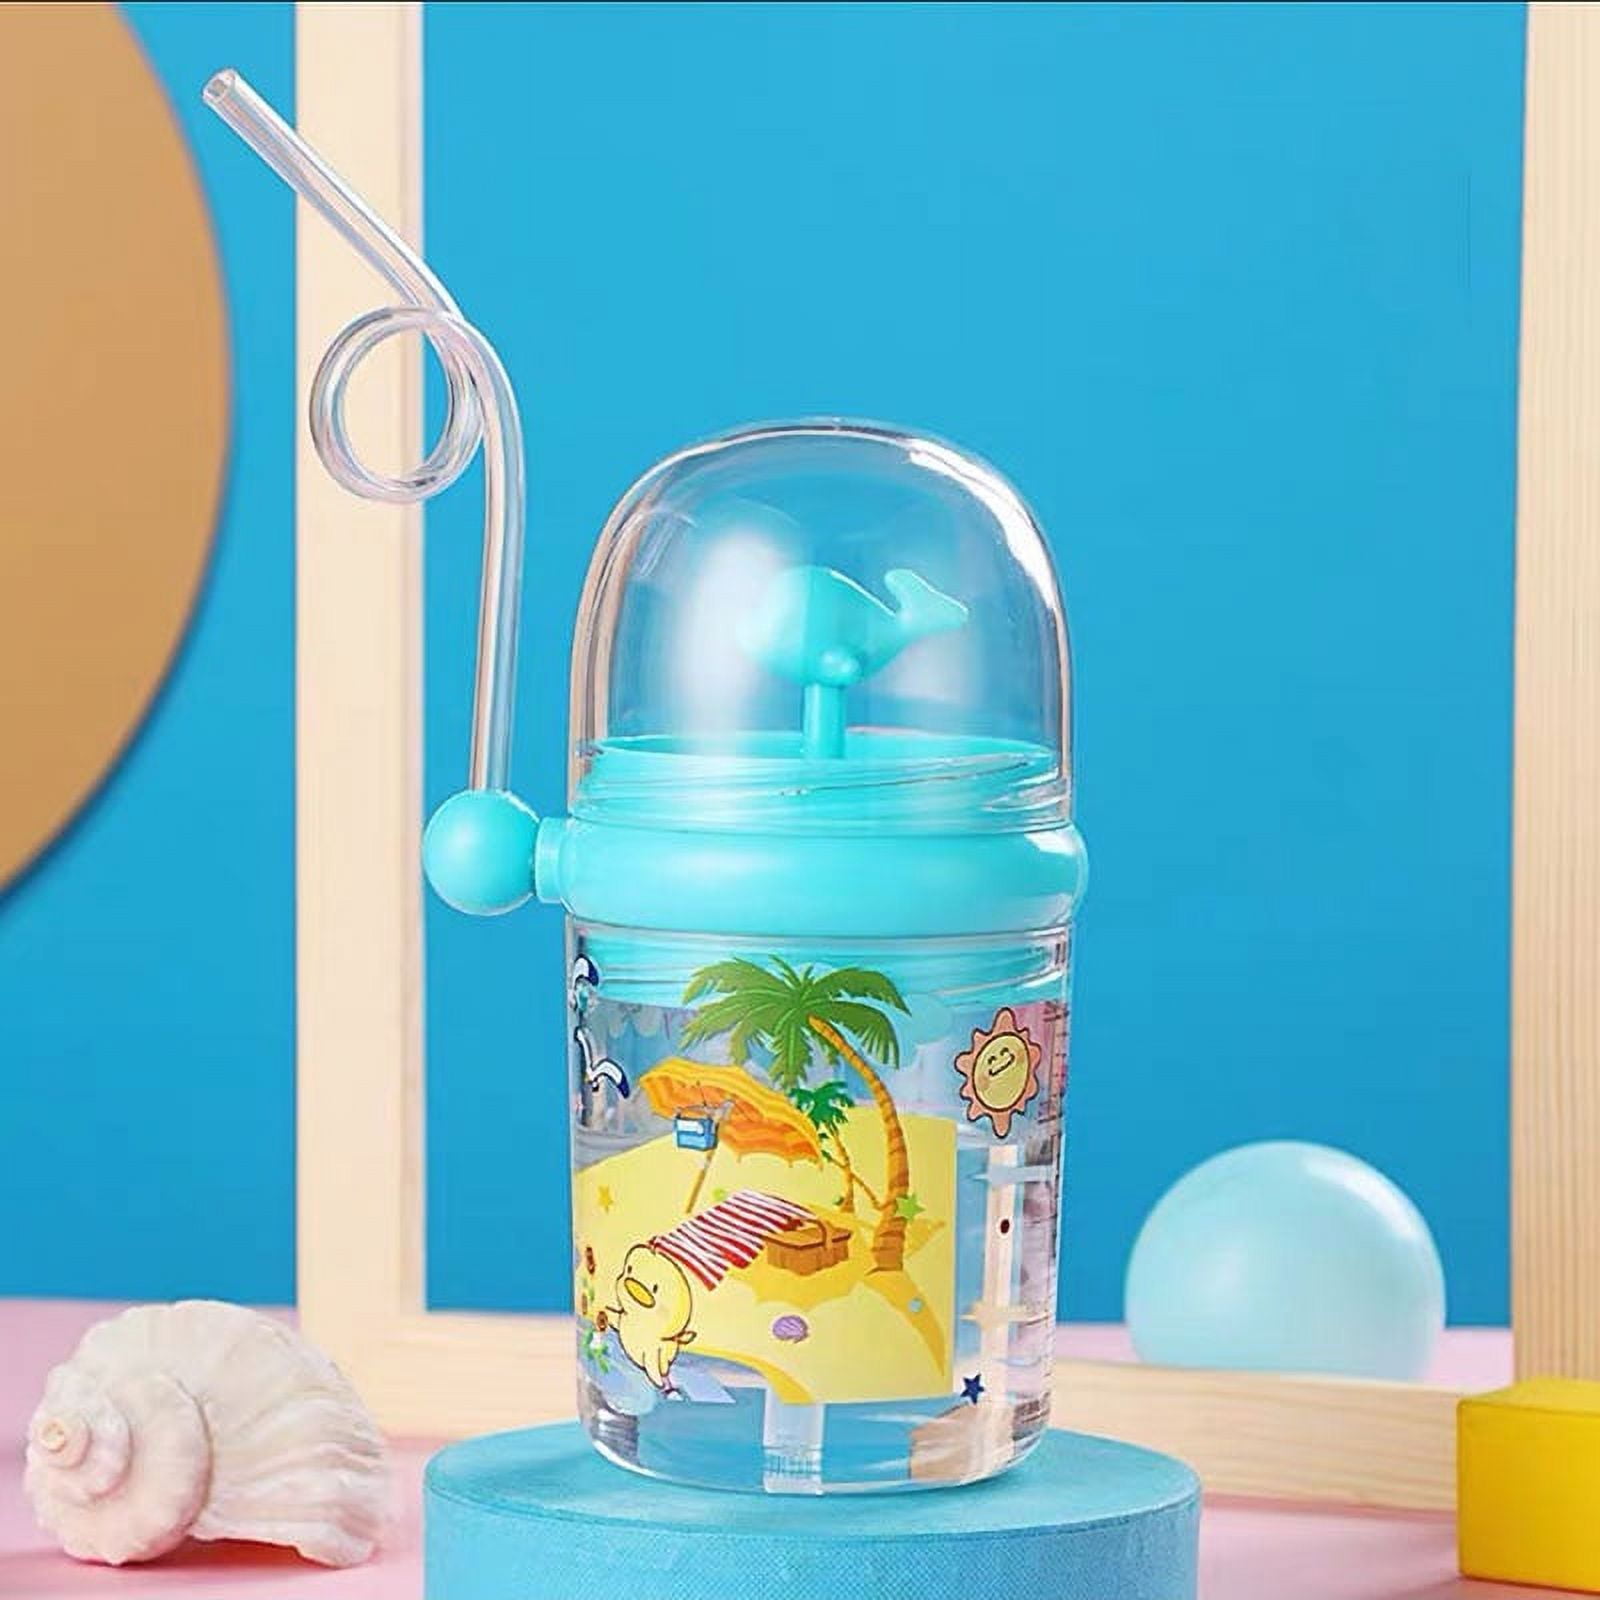 1PC Adorable Cartoon Kids' Sippy Cup - Leak Proof, Portable Water